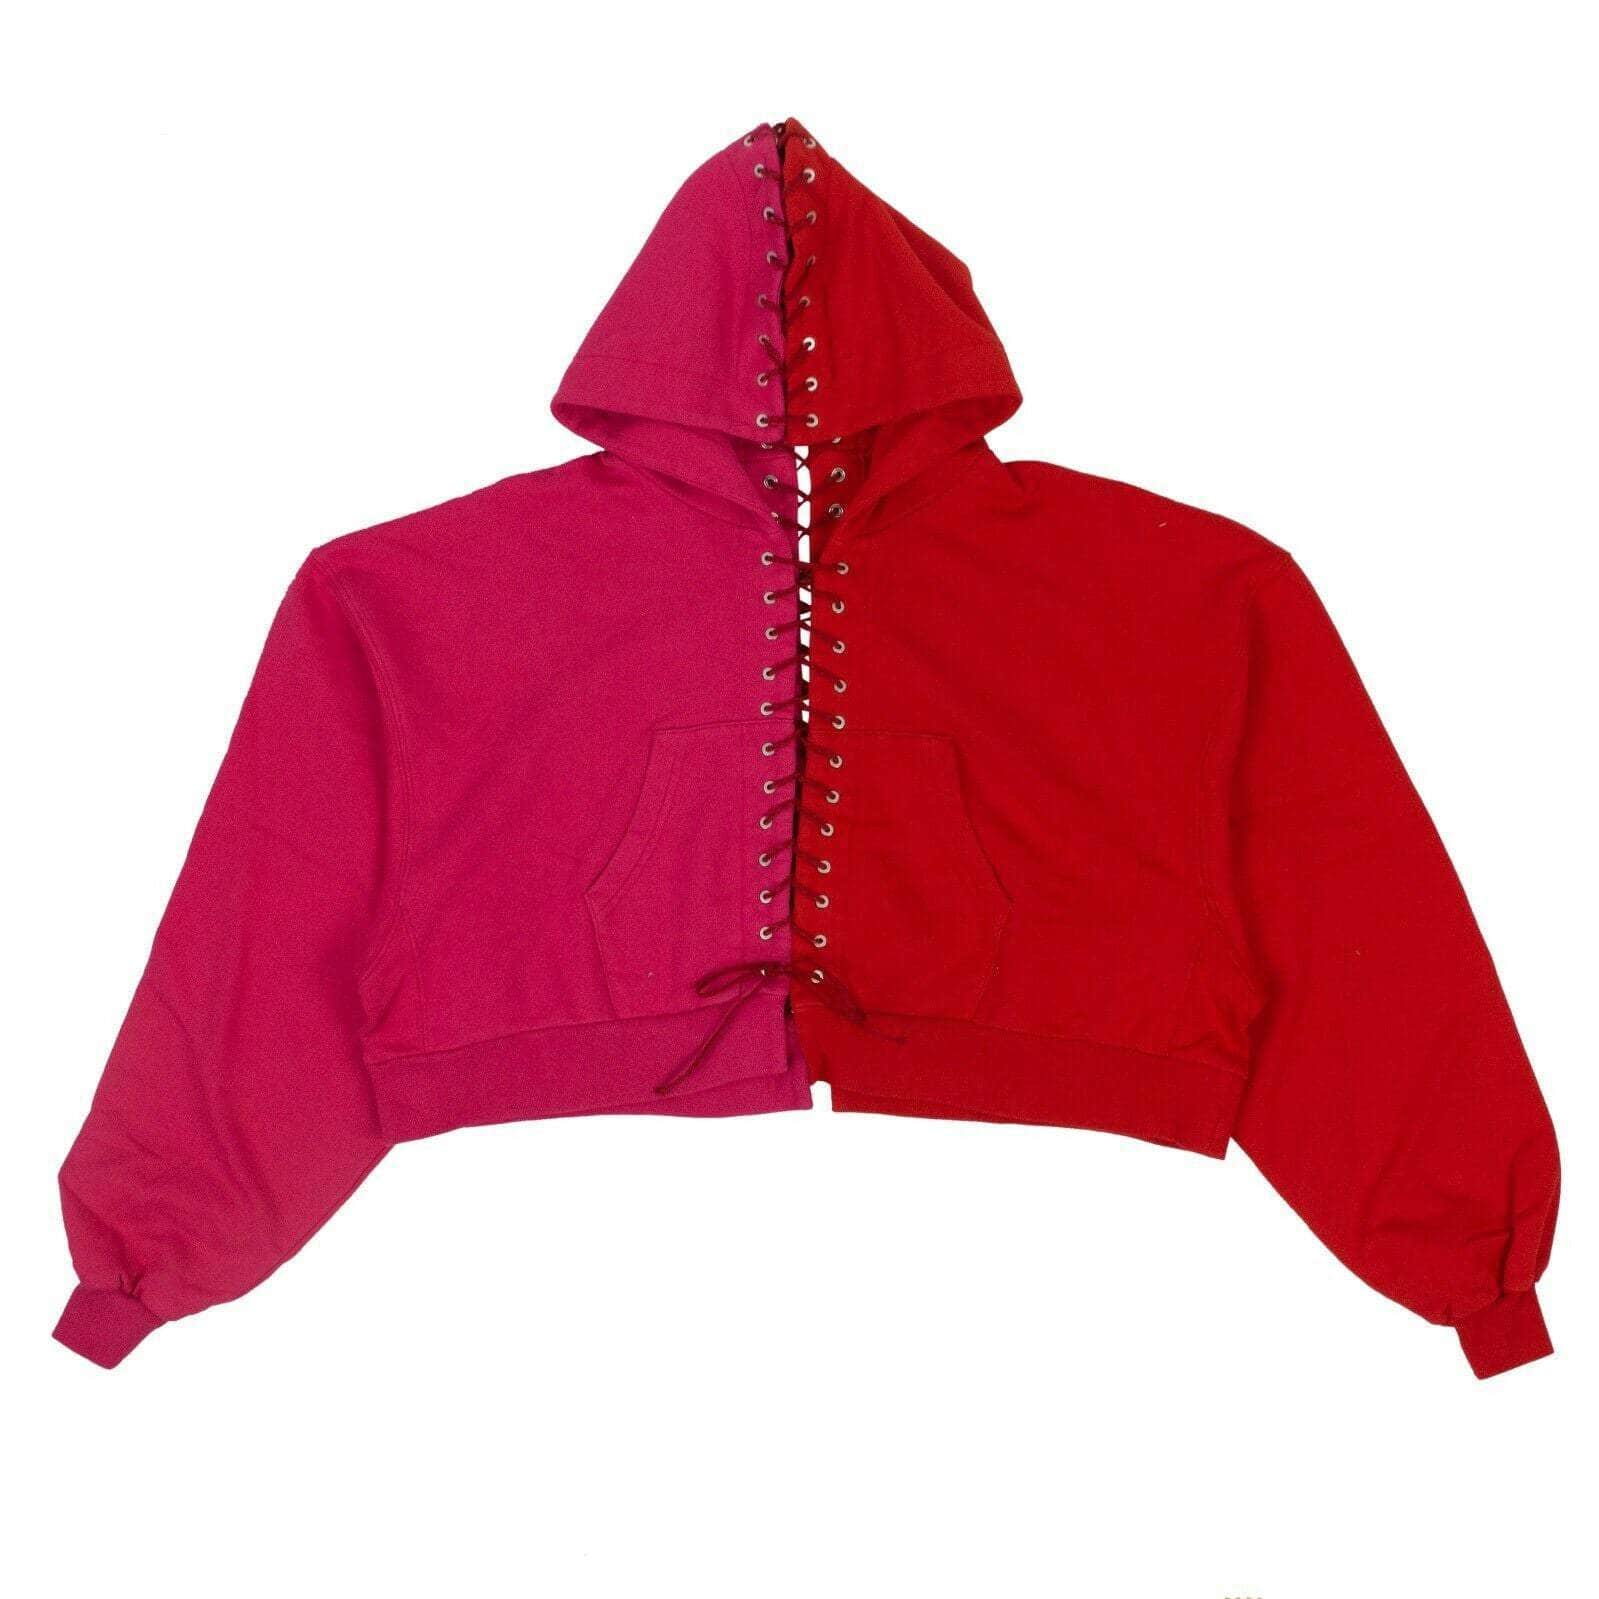 Unravel Project Women's Hoodies Lace-Up Hoodie Sweatshirt - Fuchsia And Red